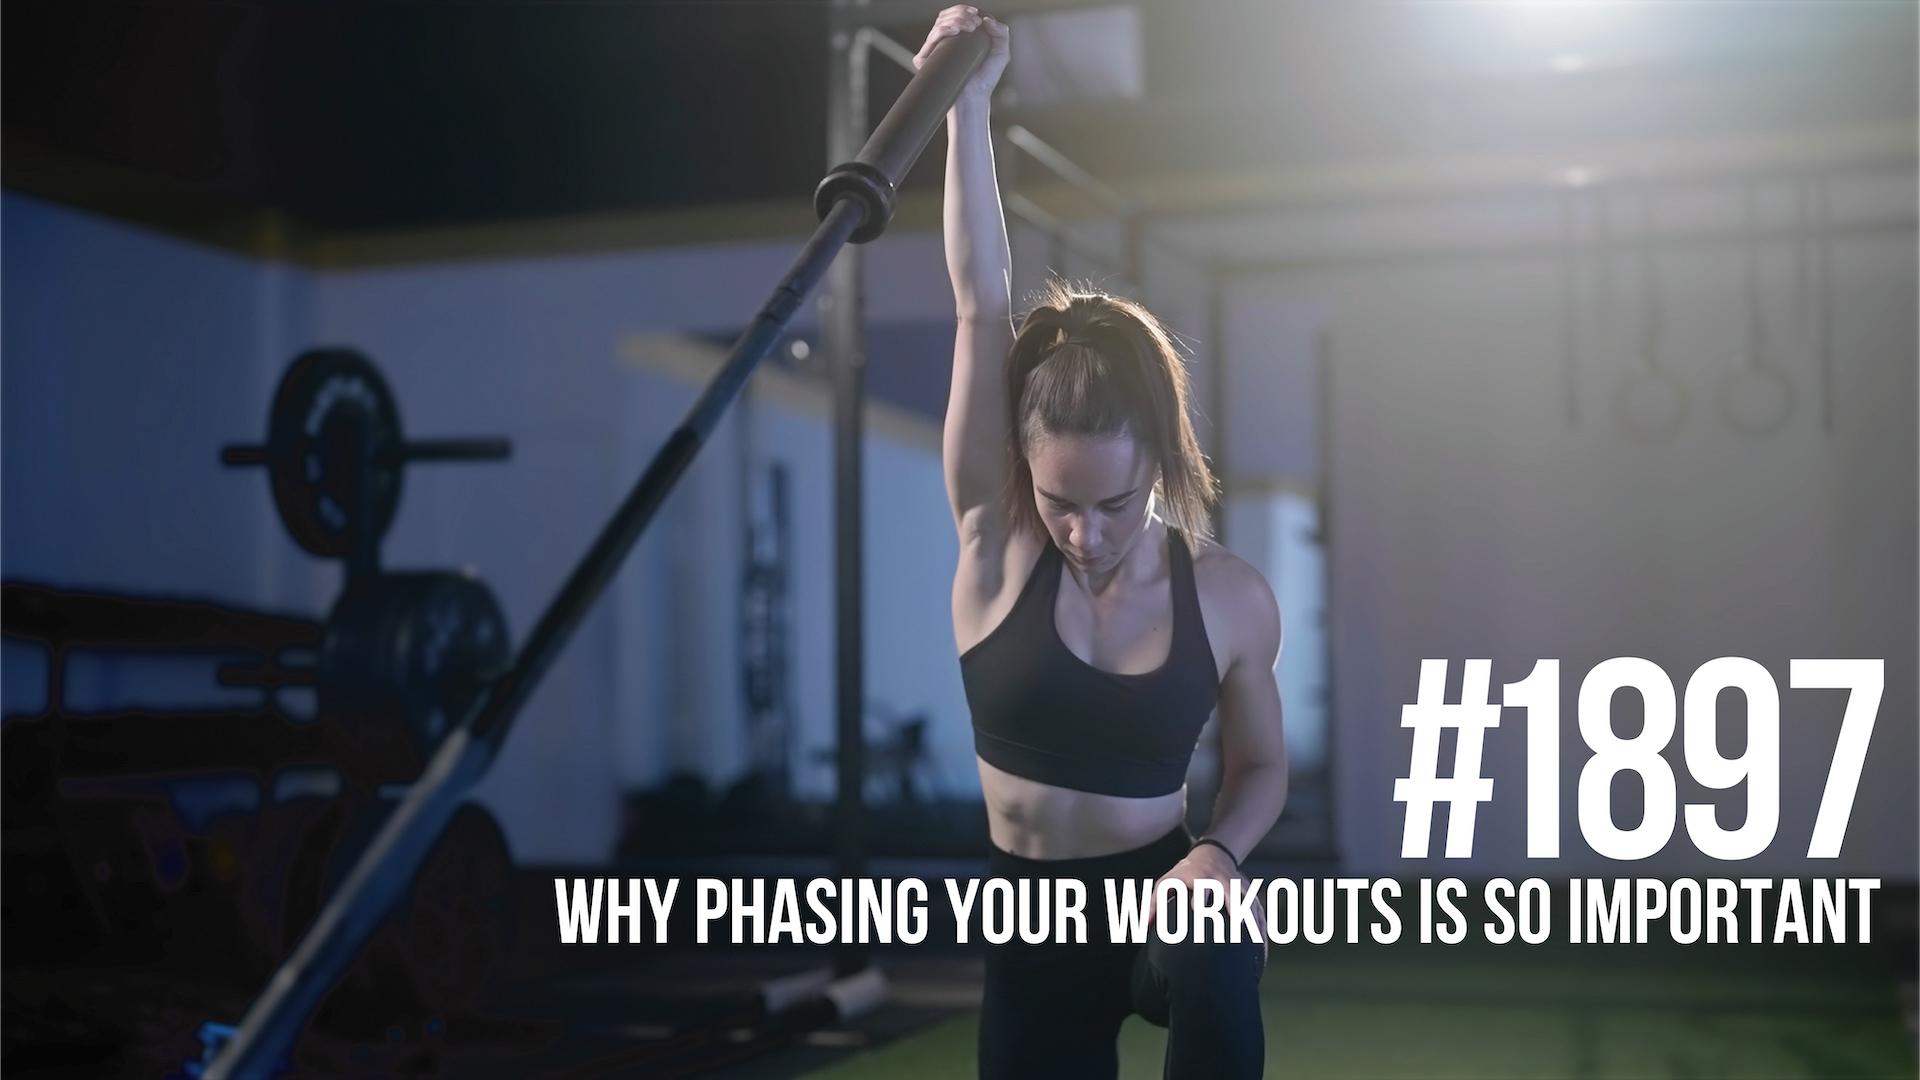 1897: Why Phasing Your Workouts Is So Important & How to Properly Switch It Up